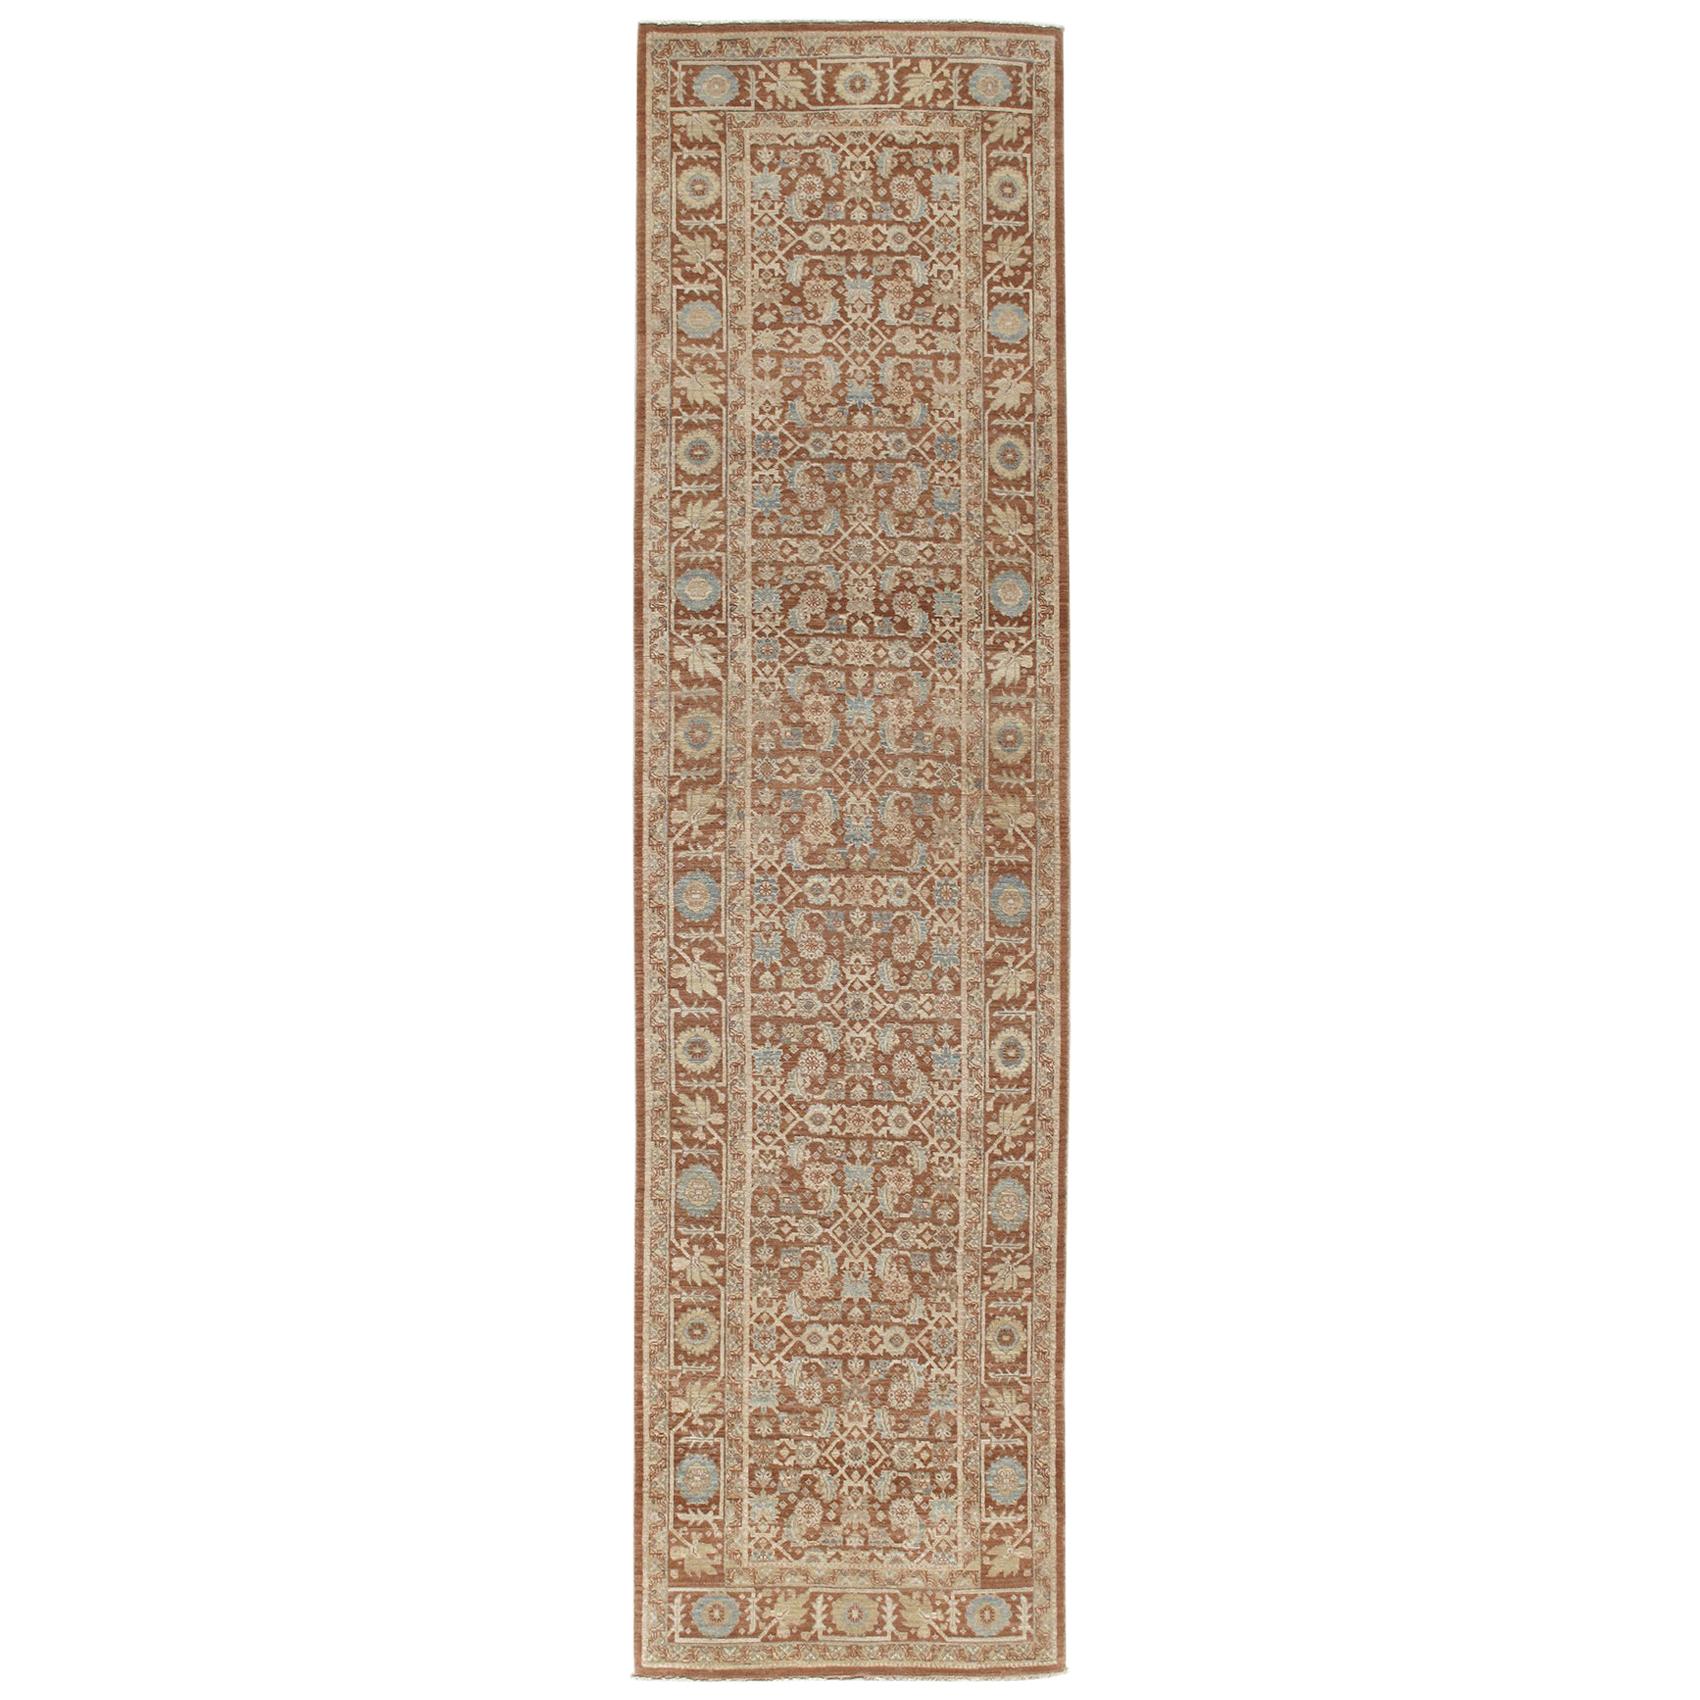 Persian Traditional Tabriz Handknotted Runner Rug in Camel and Rust Color